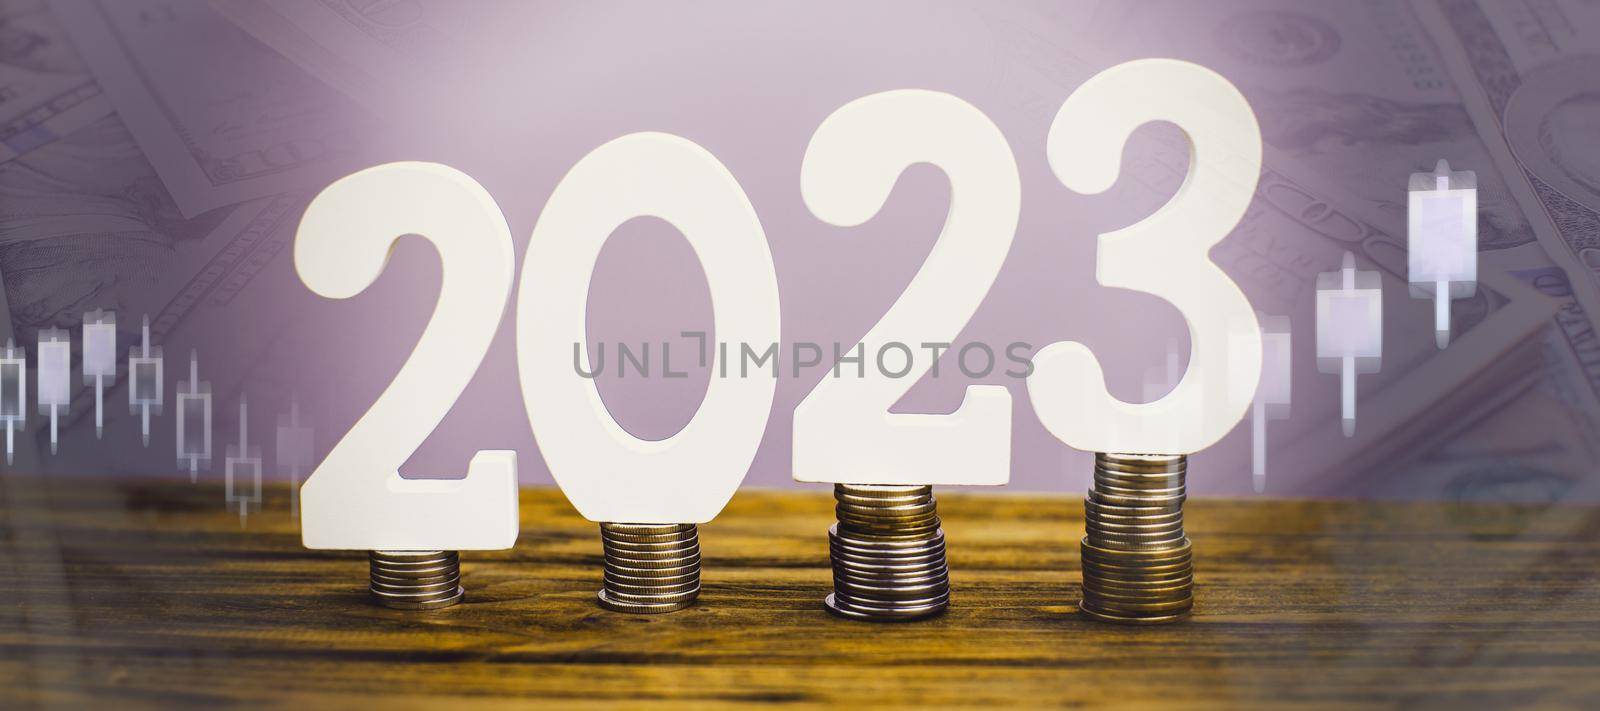 2023 on the stack of coins. tax payment, investment, and banking concept. 2023 new year saving money and financial planning concept